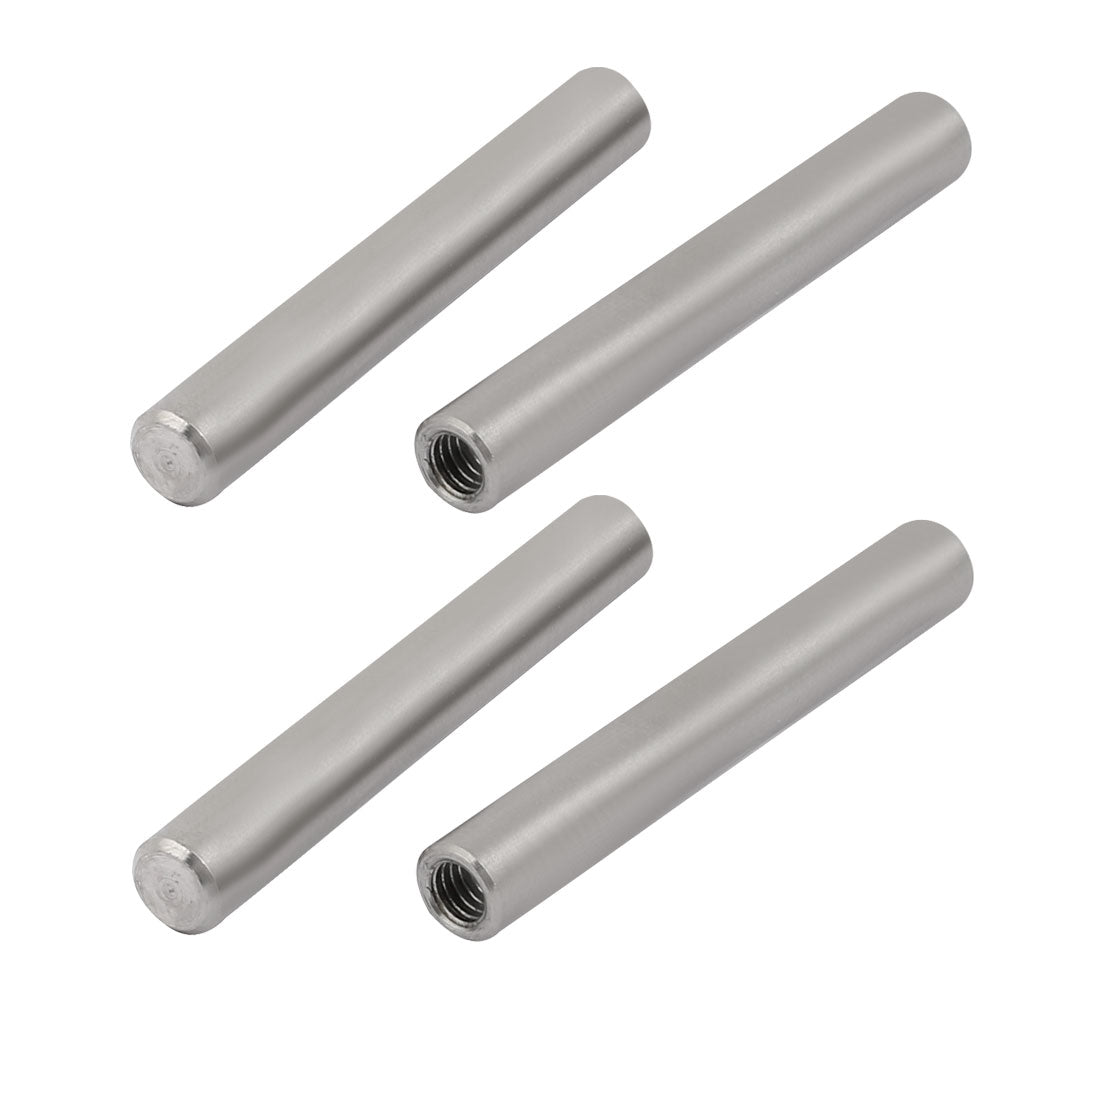 uxcell Uxcell 304 Stainless Steel M4 Female Thread 6mm x 45mm Cylindrical Dowel Pin 4pcs